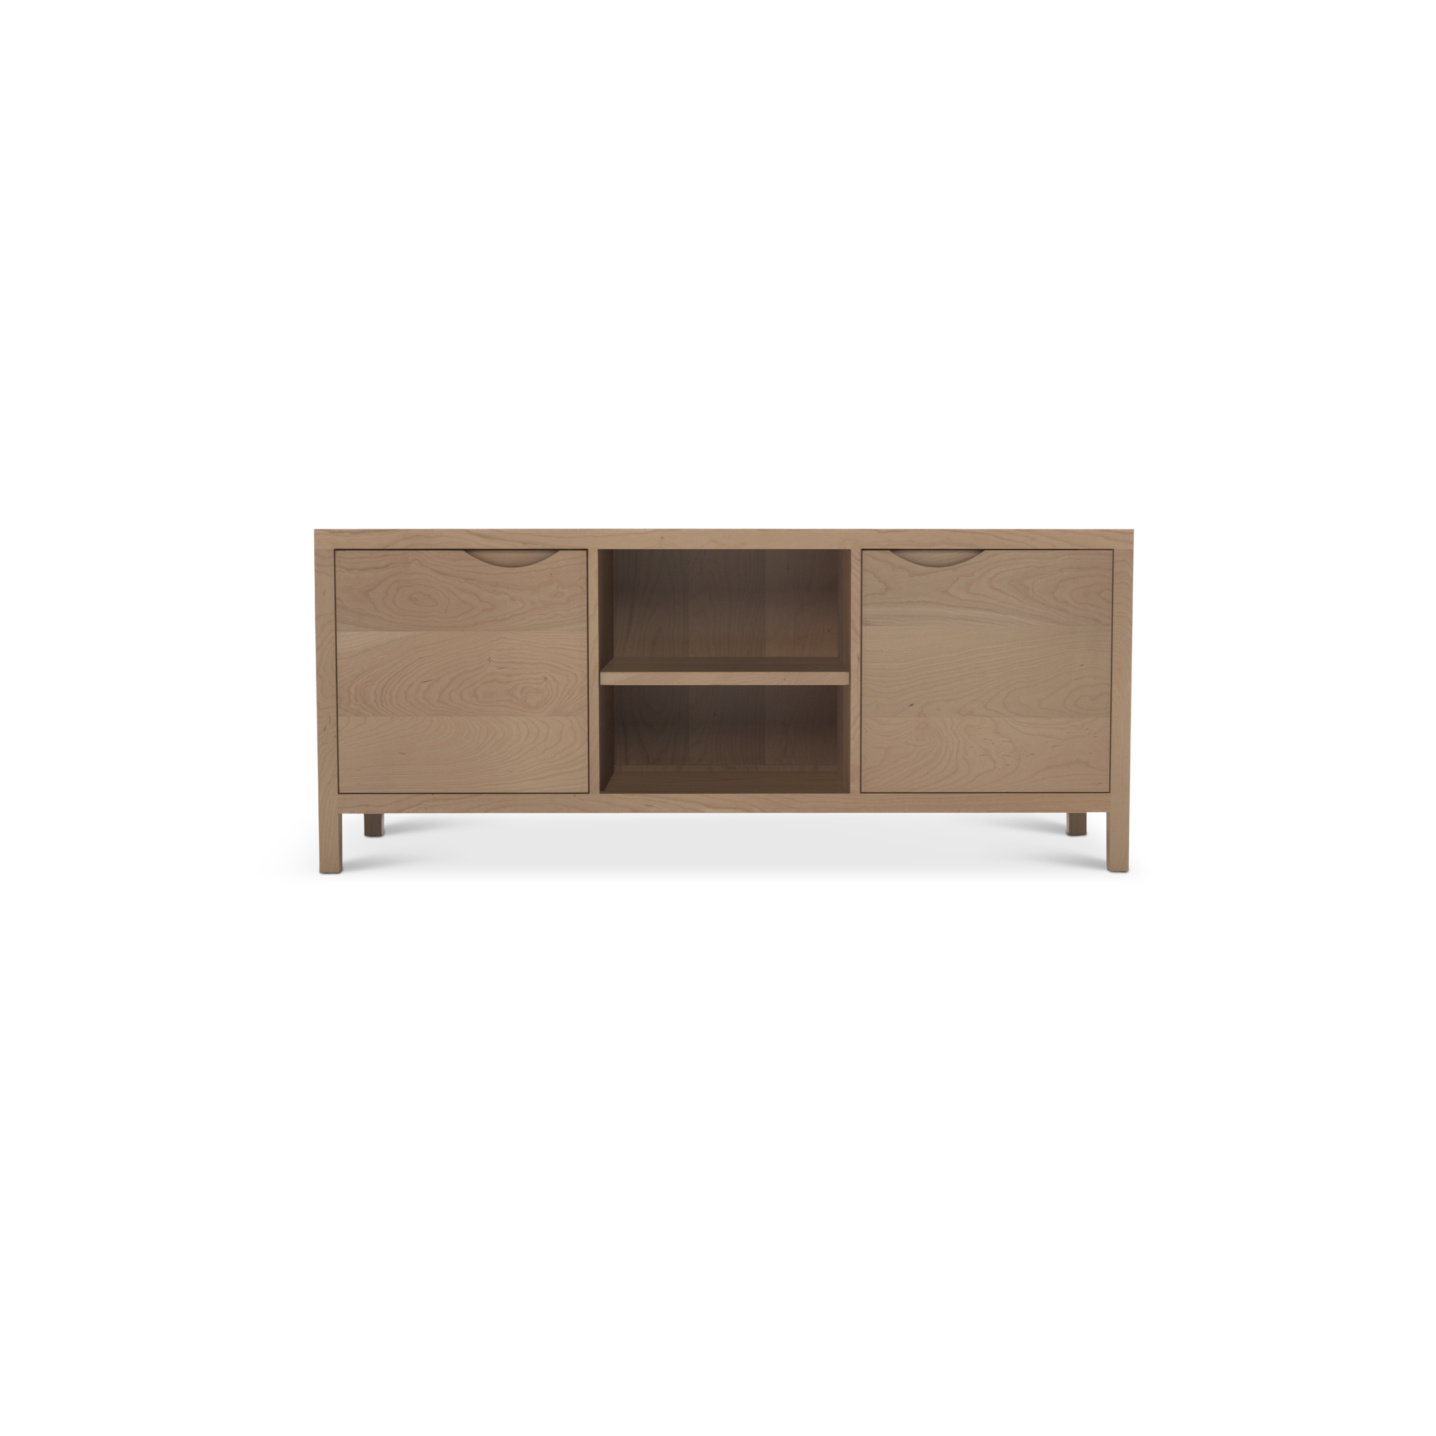 60" two door solid cherry modern media console